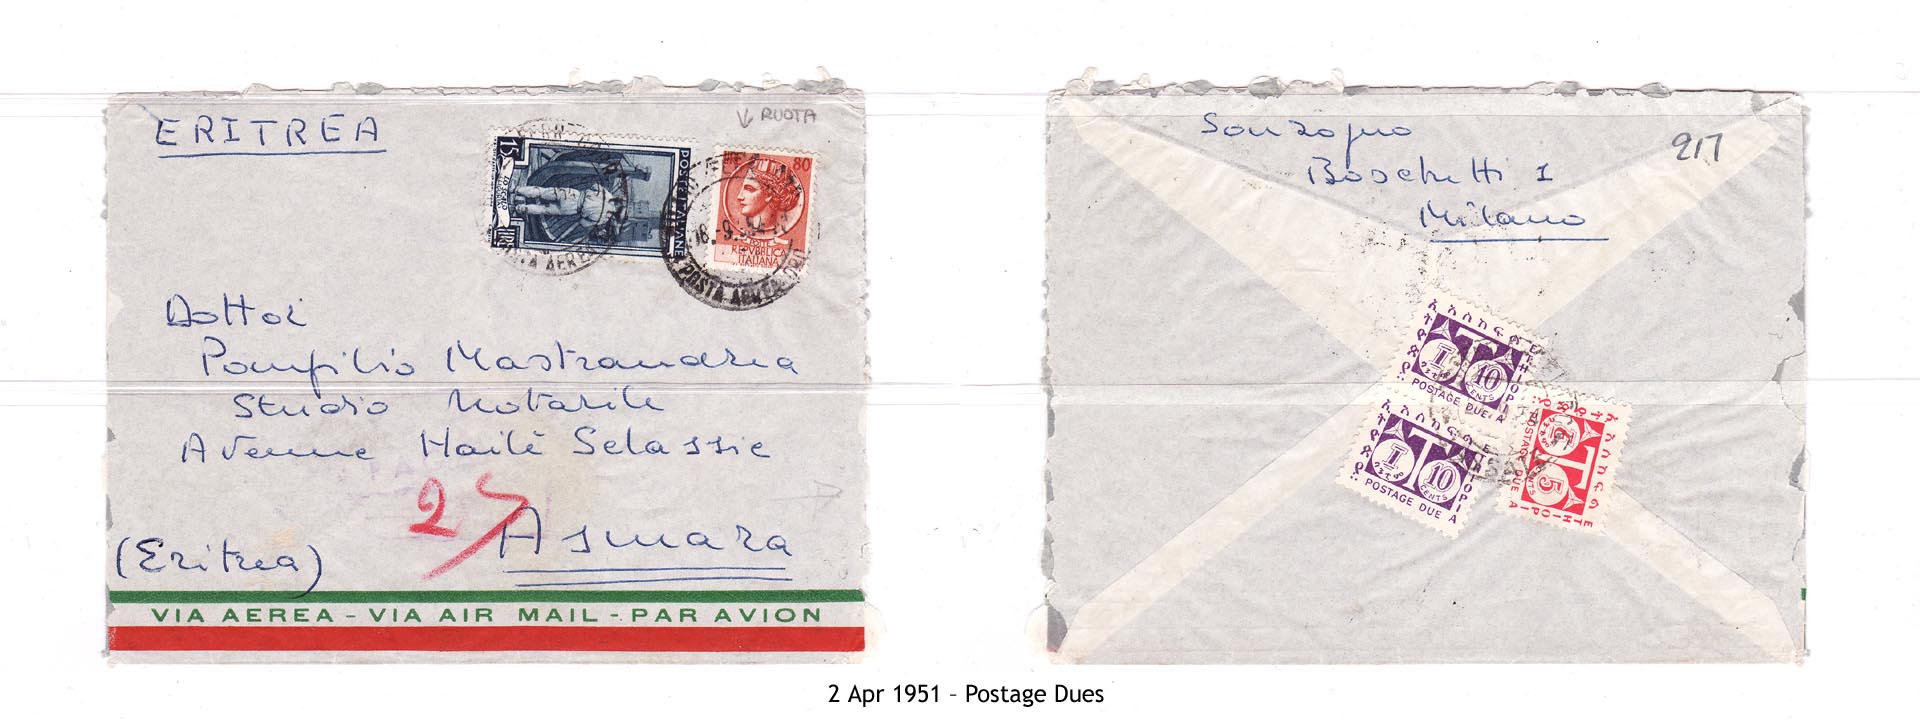 19510402 – Postage Dues